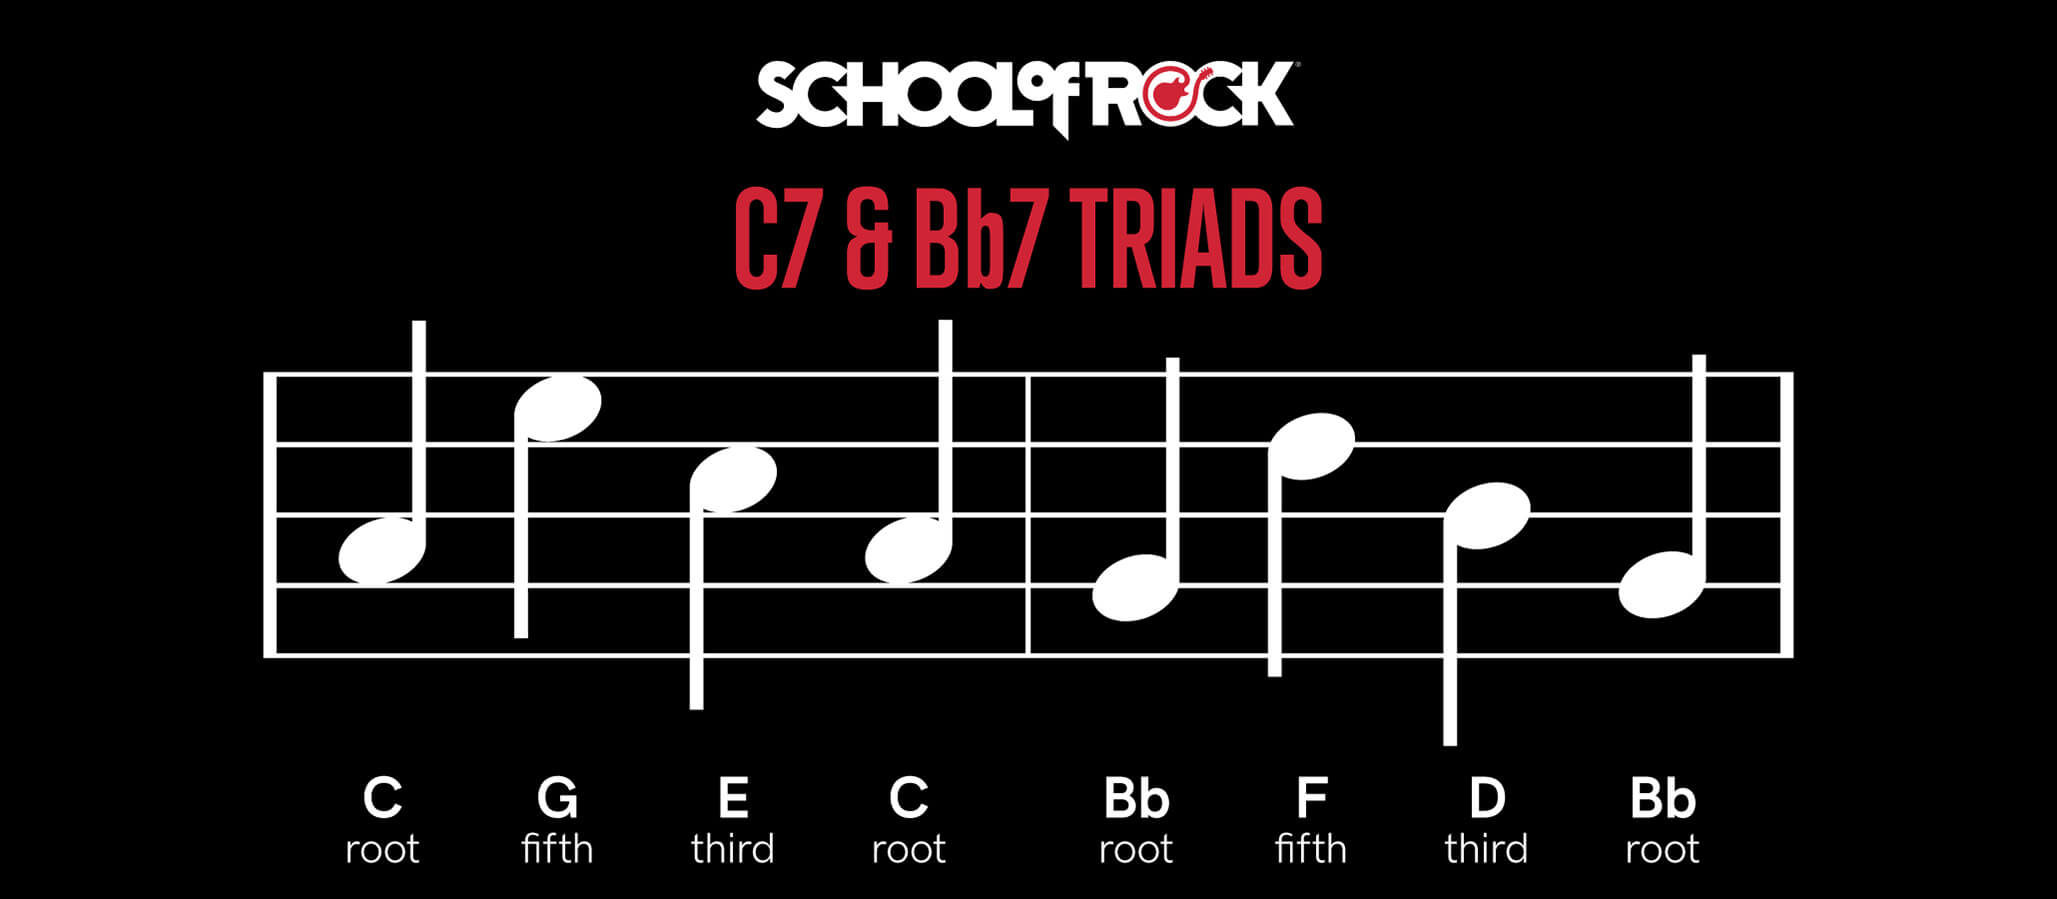 Measures 9 and 10 have the pattern of root, fifth, third, and root for their respective chords: C7 and Bb7.